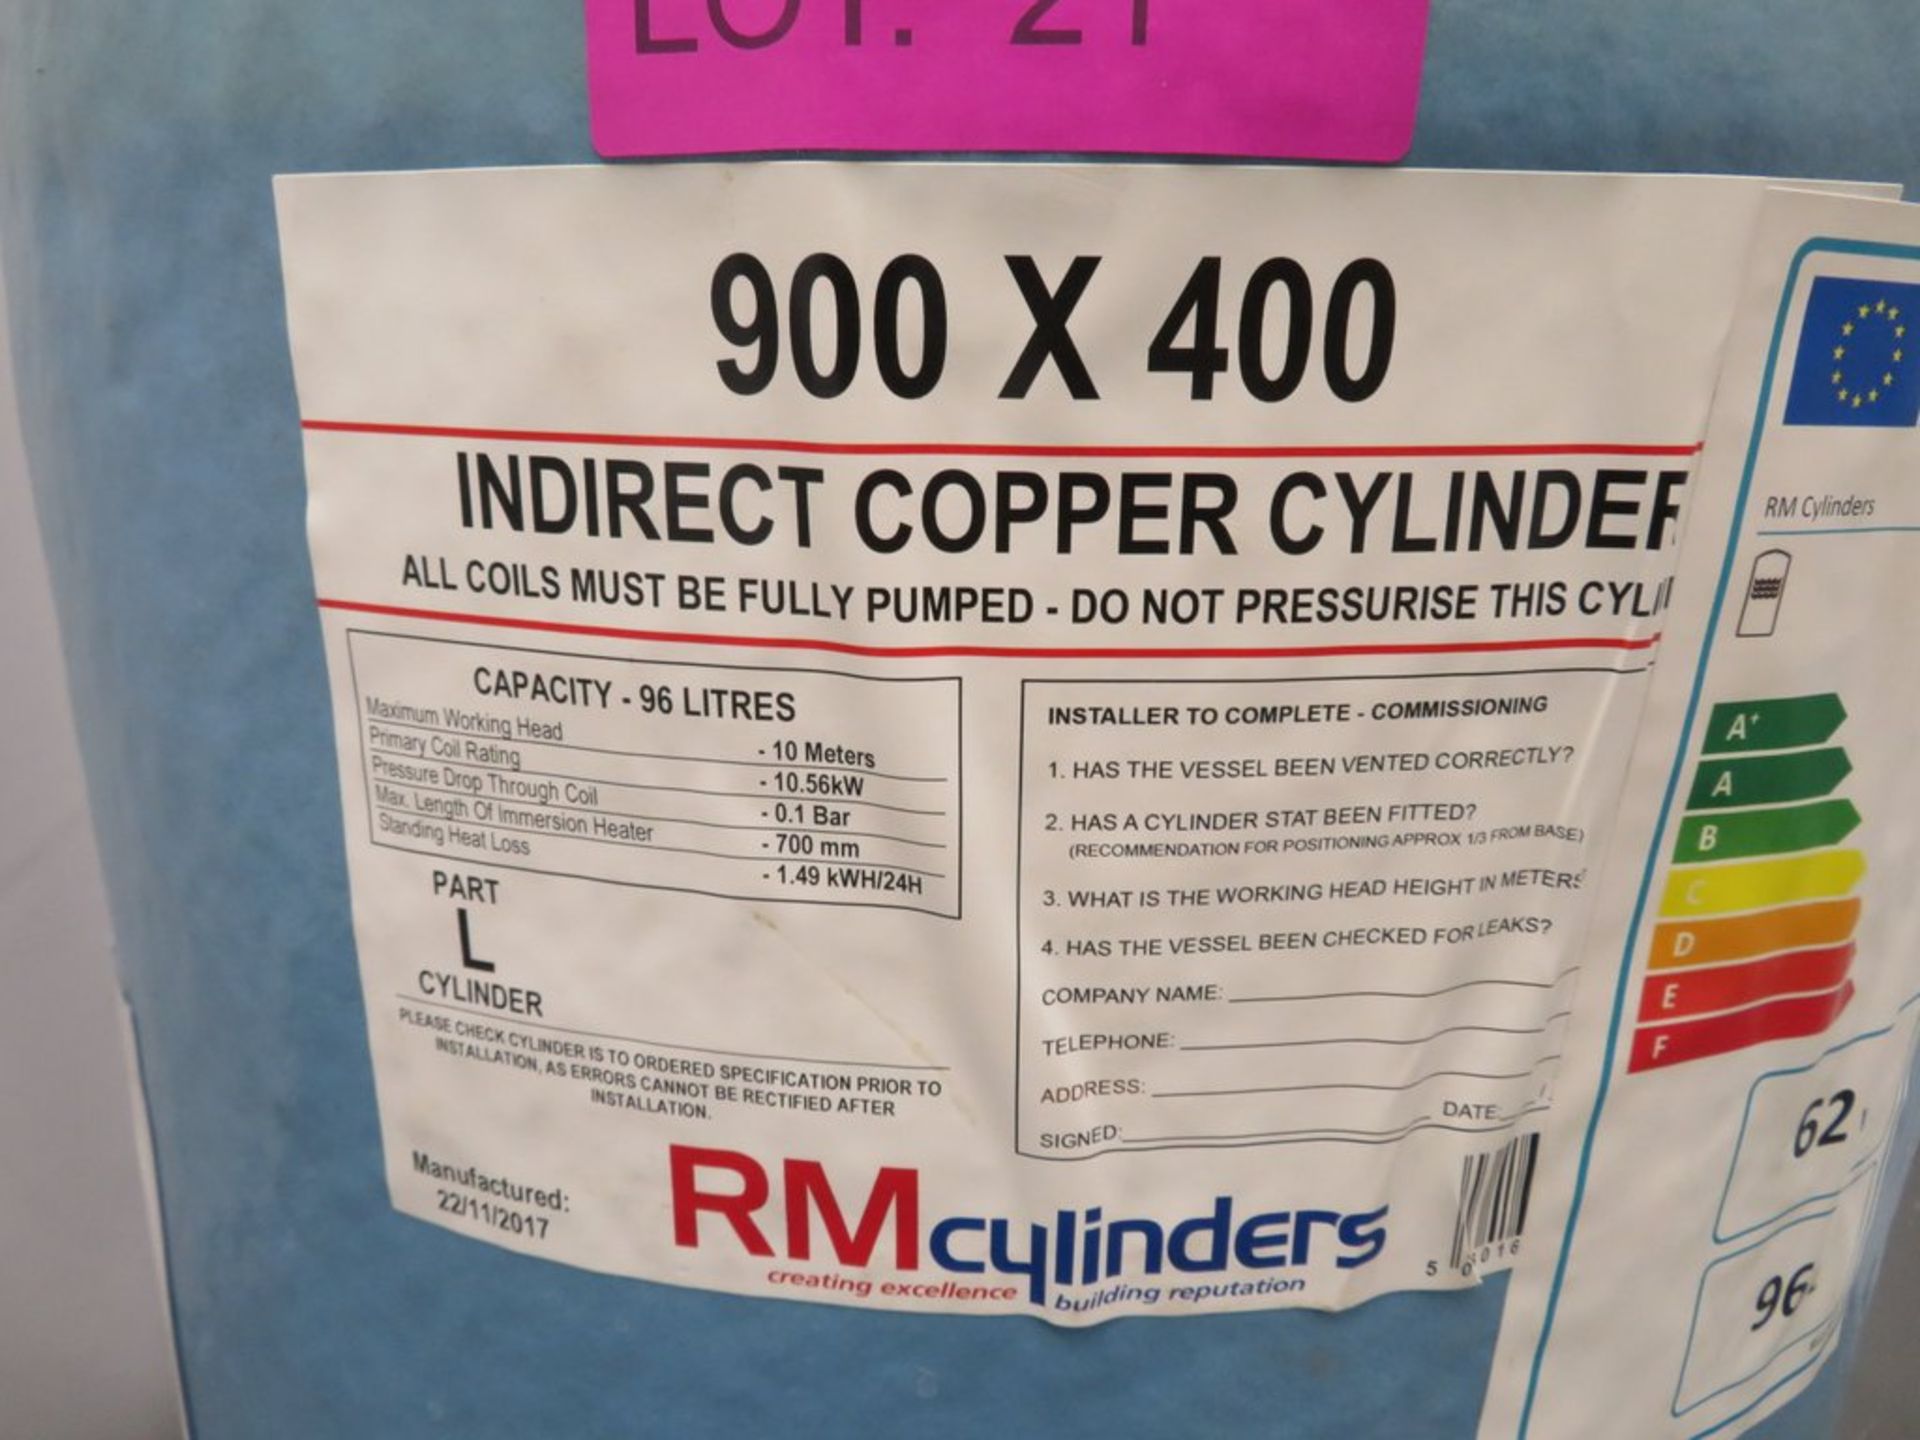 Indirect Copper Cylinder Hot Water Tank. 900 x 400. 96L Capacity. - Image 4 of 5